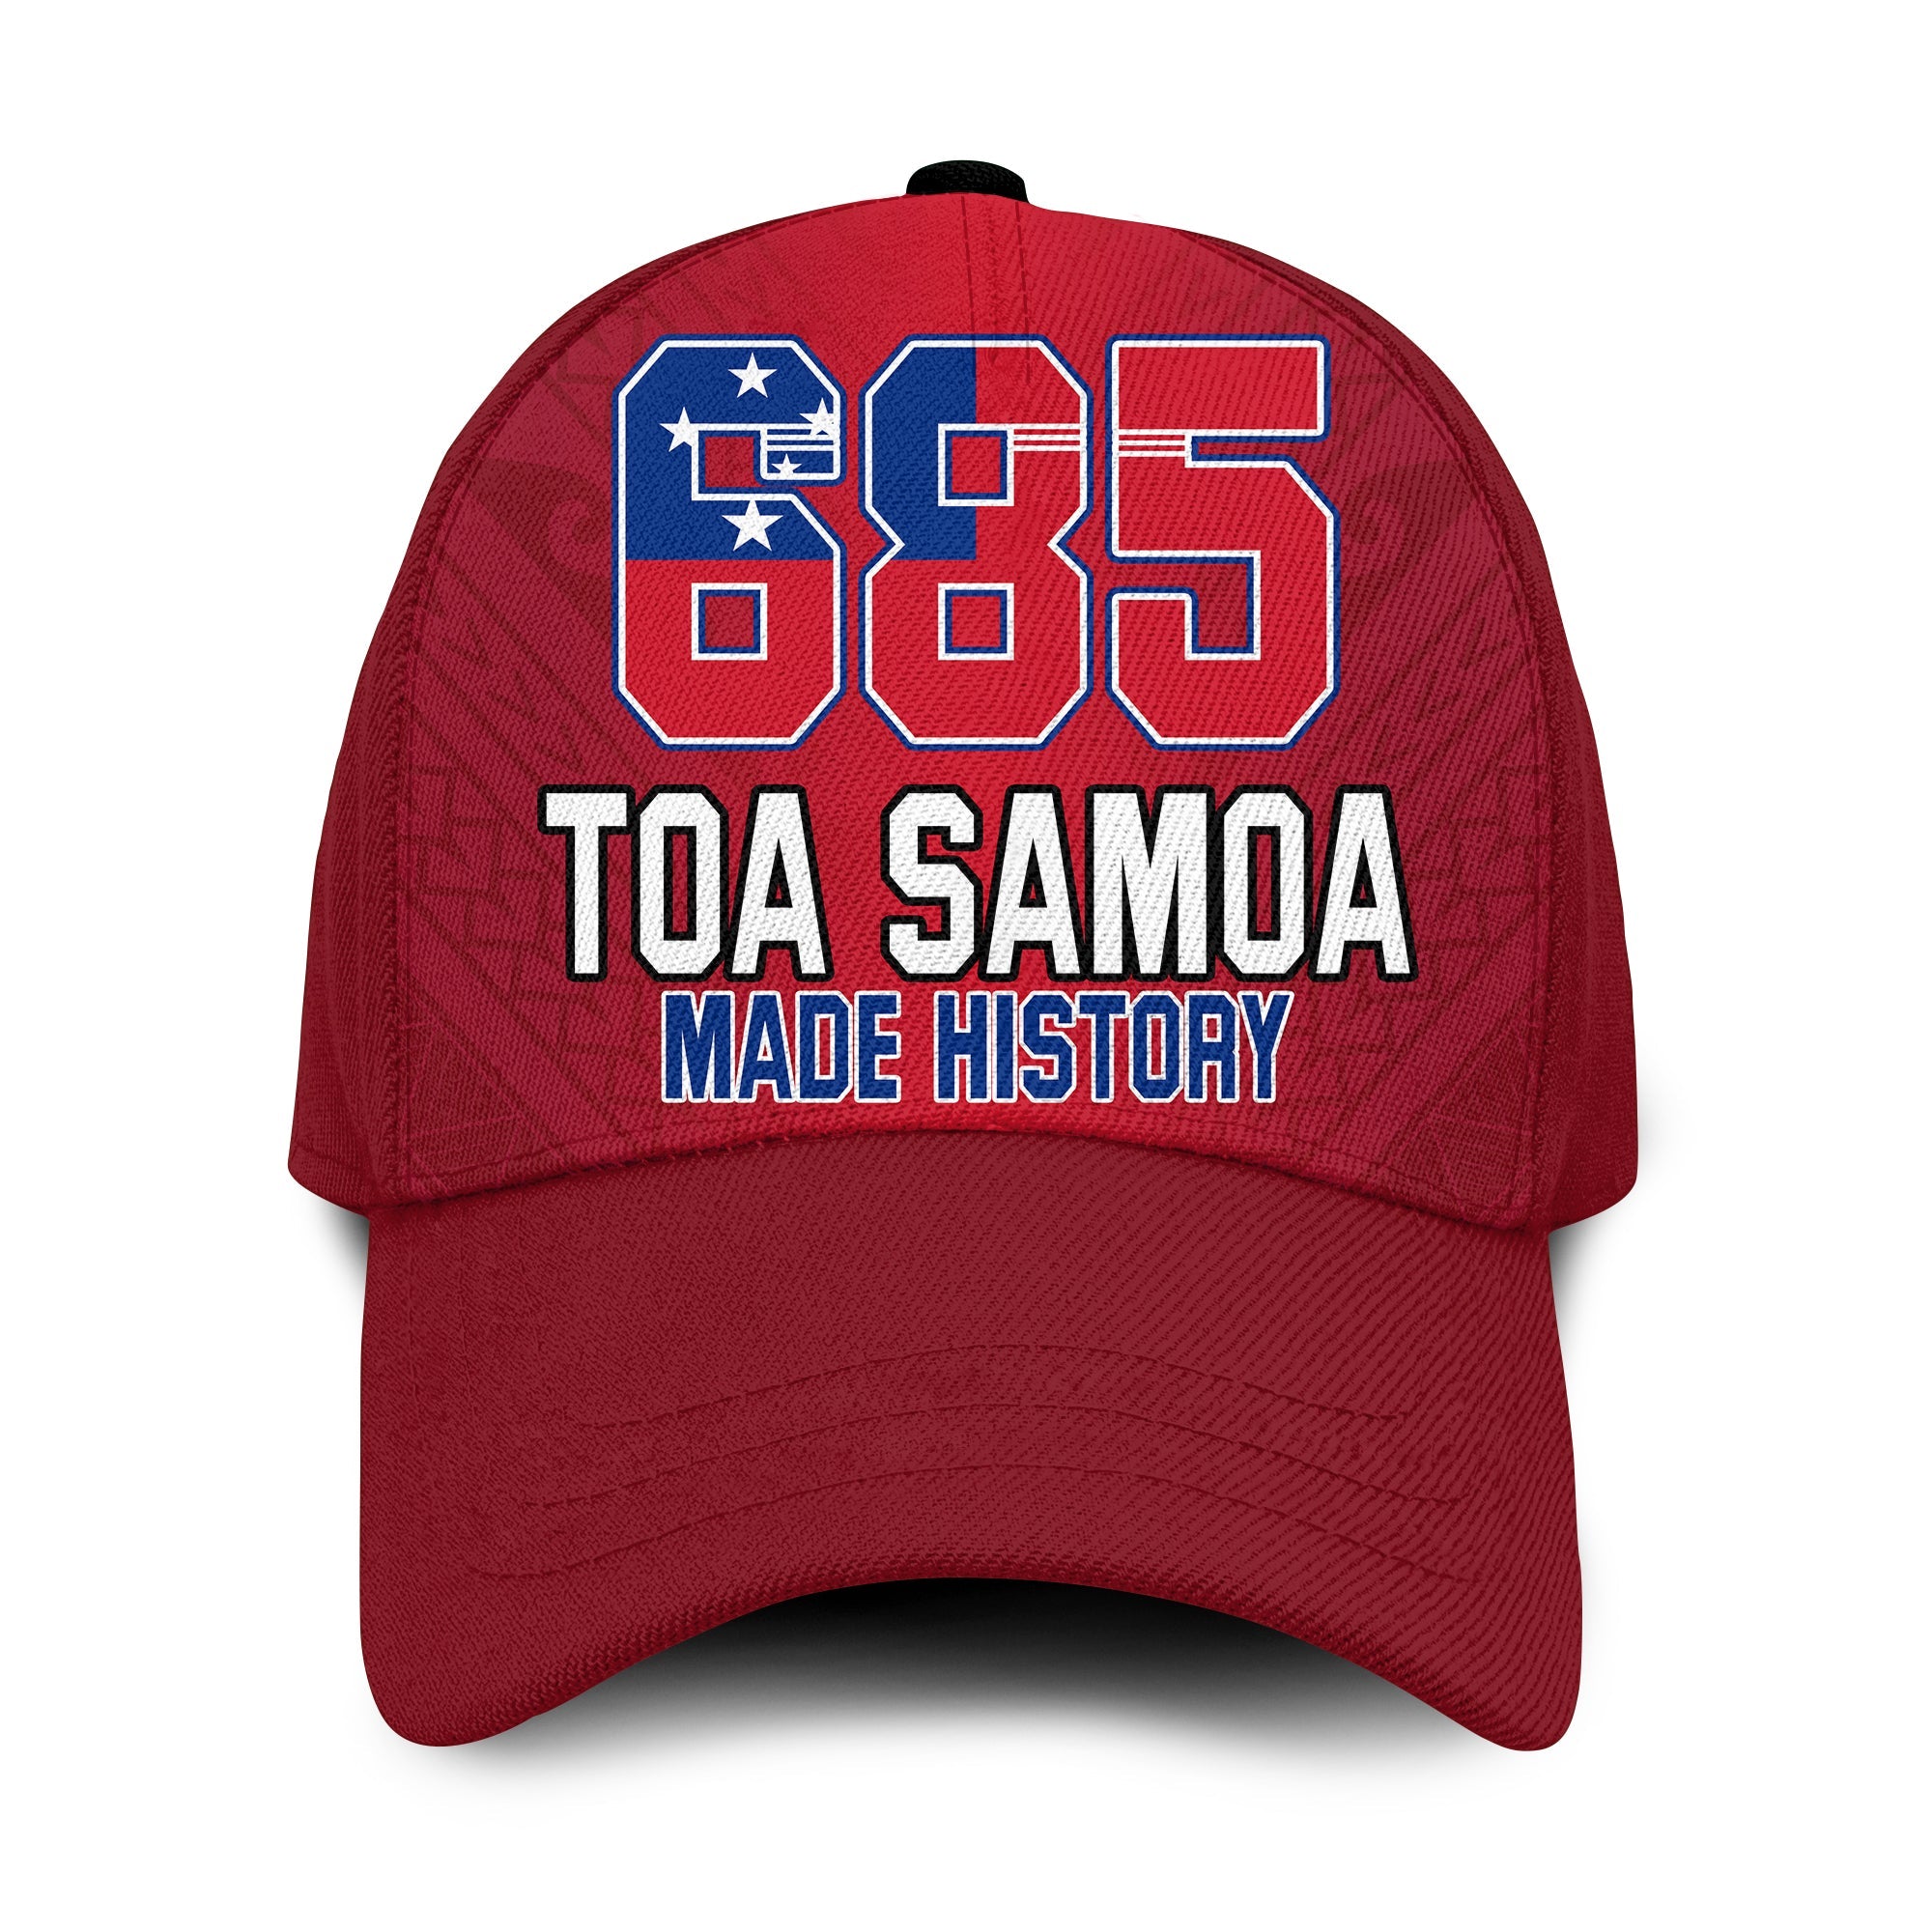 Toa Samoa Rugby Classic Cap Proud 685 Made History Red Ver.03 LT13 Classic Cap Universal Fit Red - Polynesian Pride